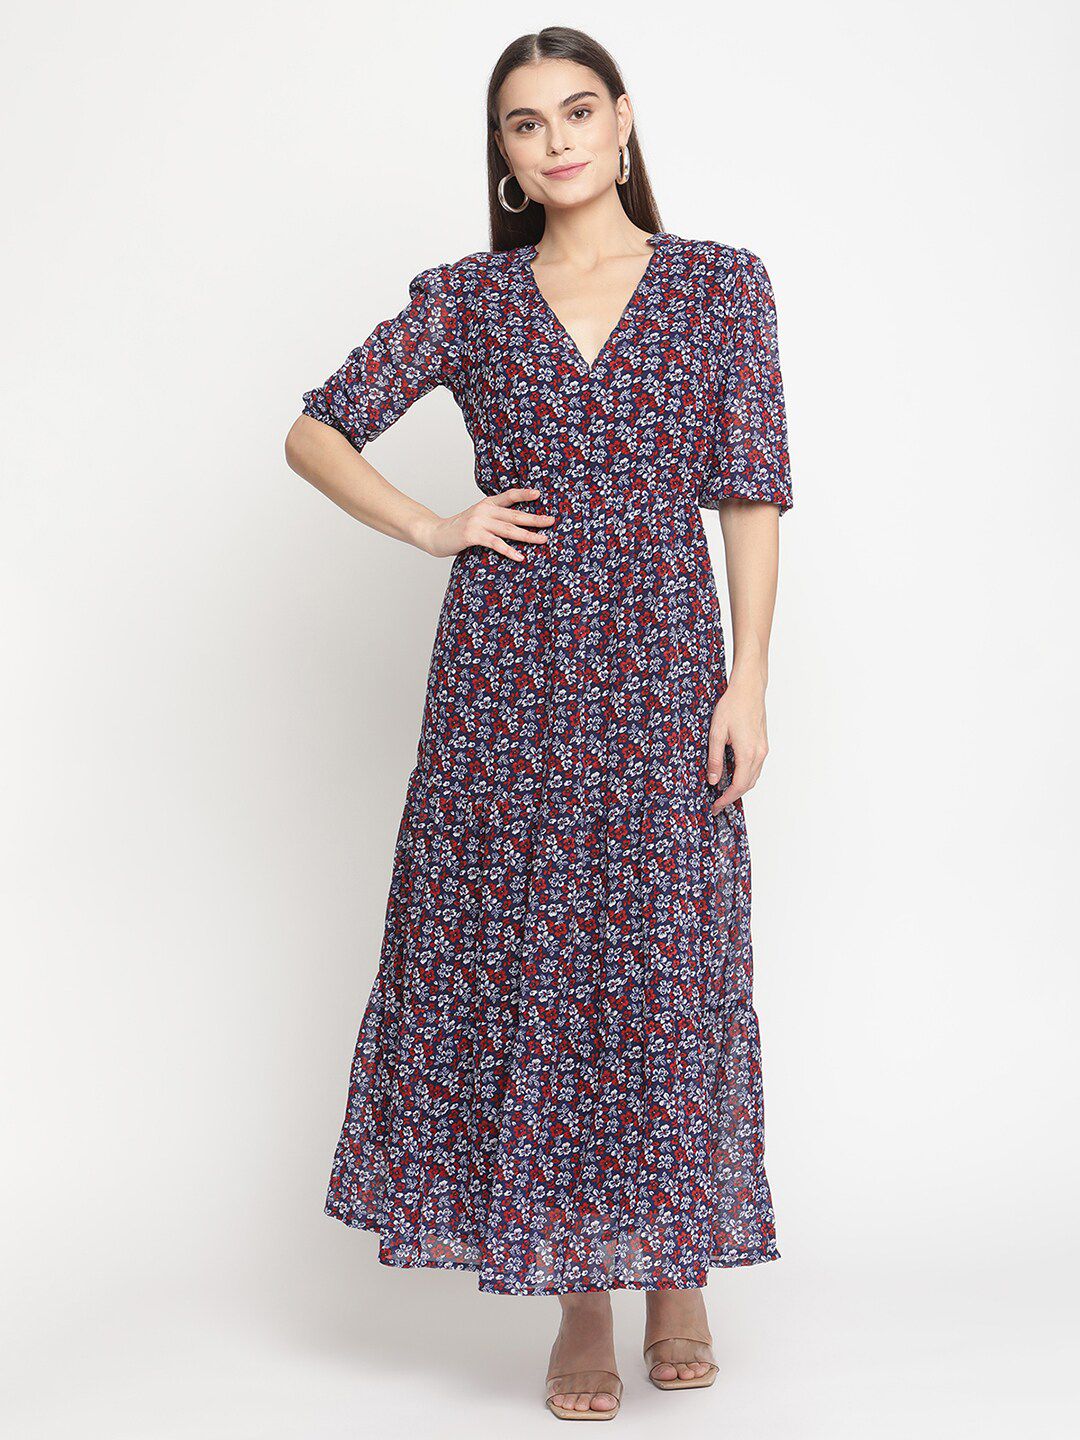 The Vanca Blue & Red Floral Maxi Dress Price in India